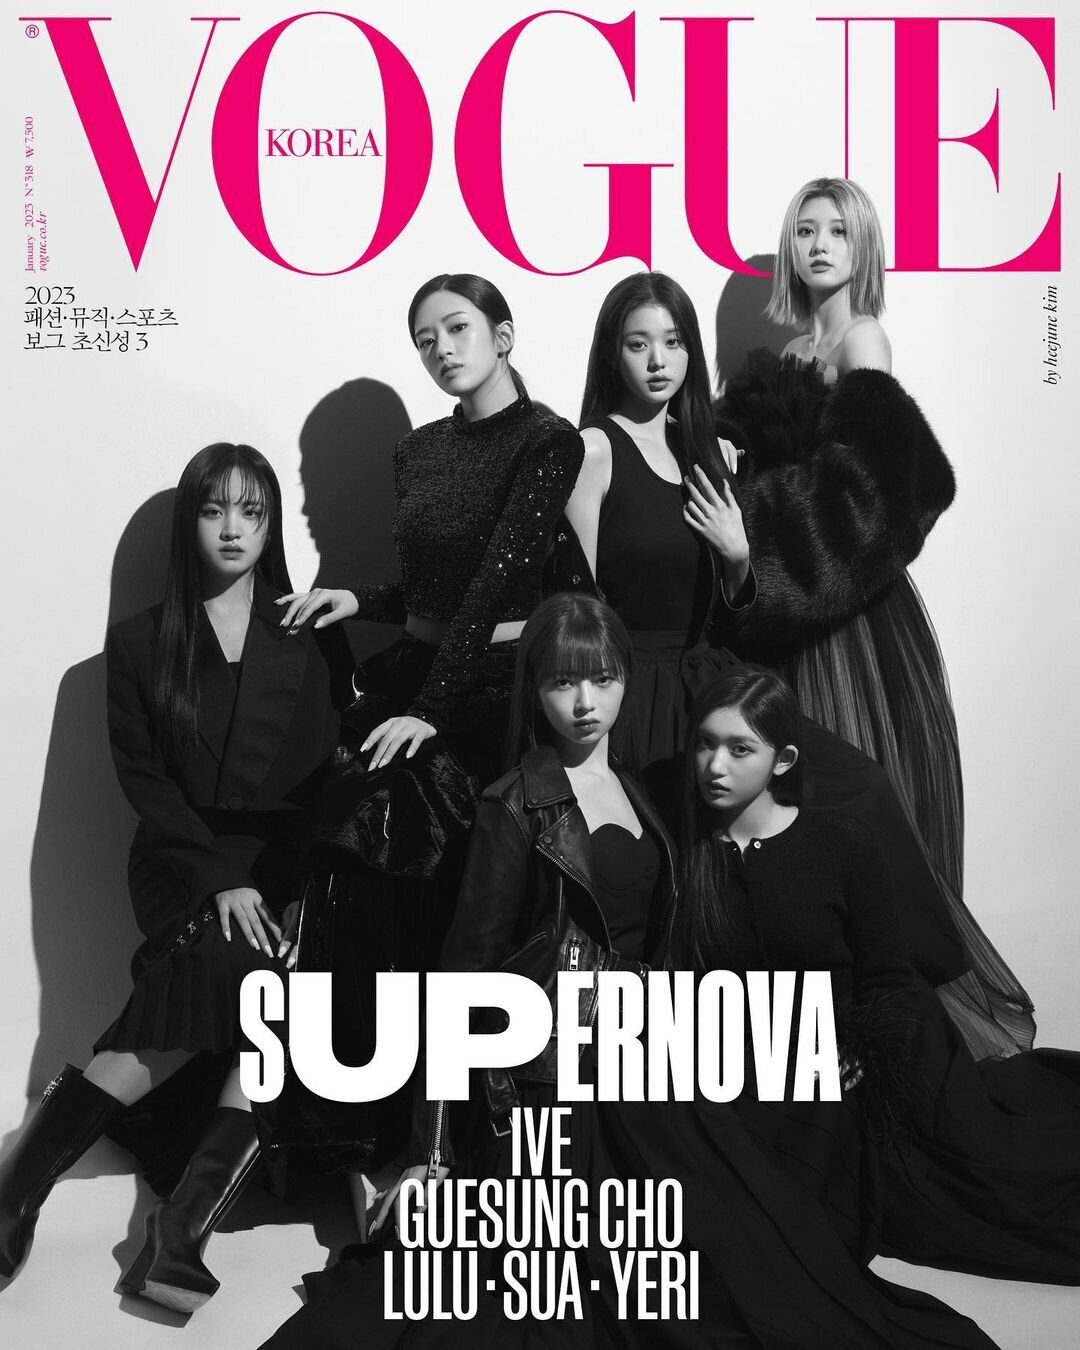 IVE for VOGUE Korea January Issue 2023 kpopping